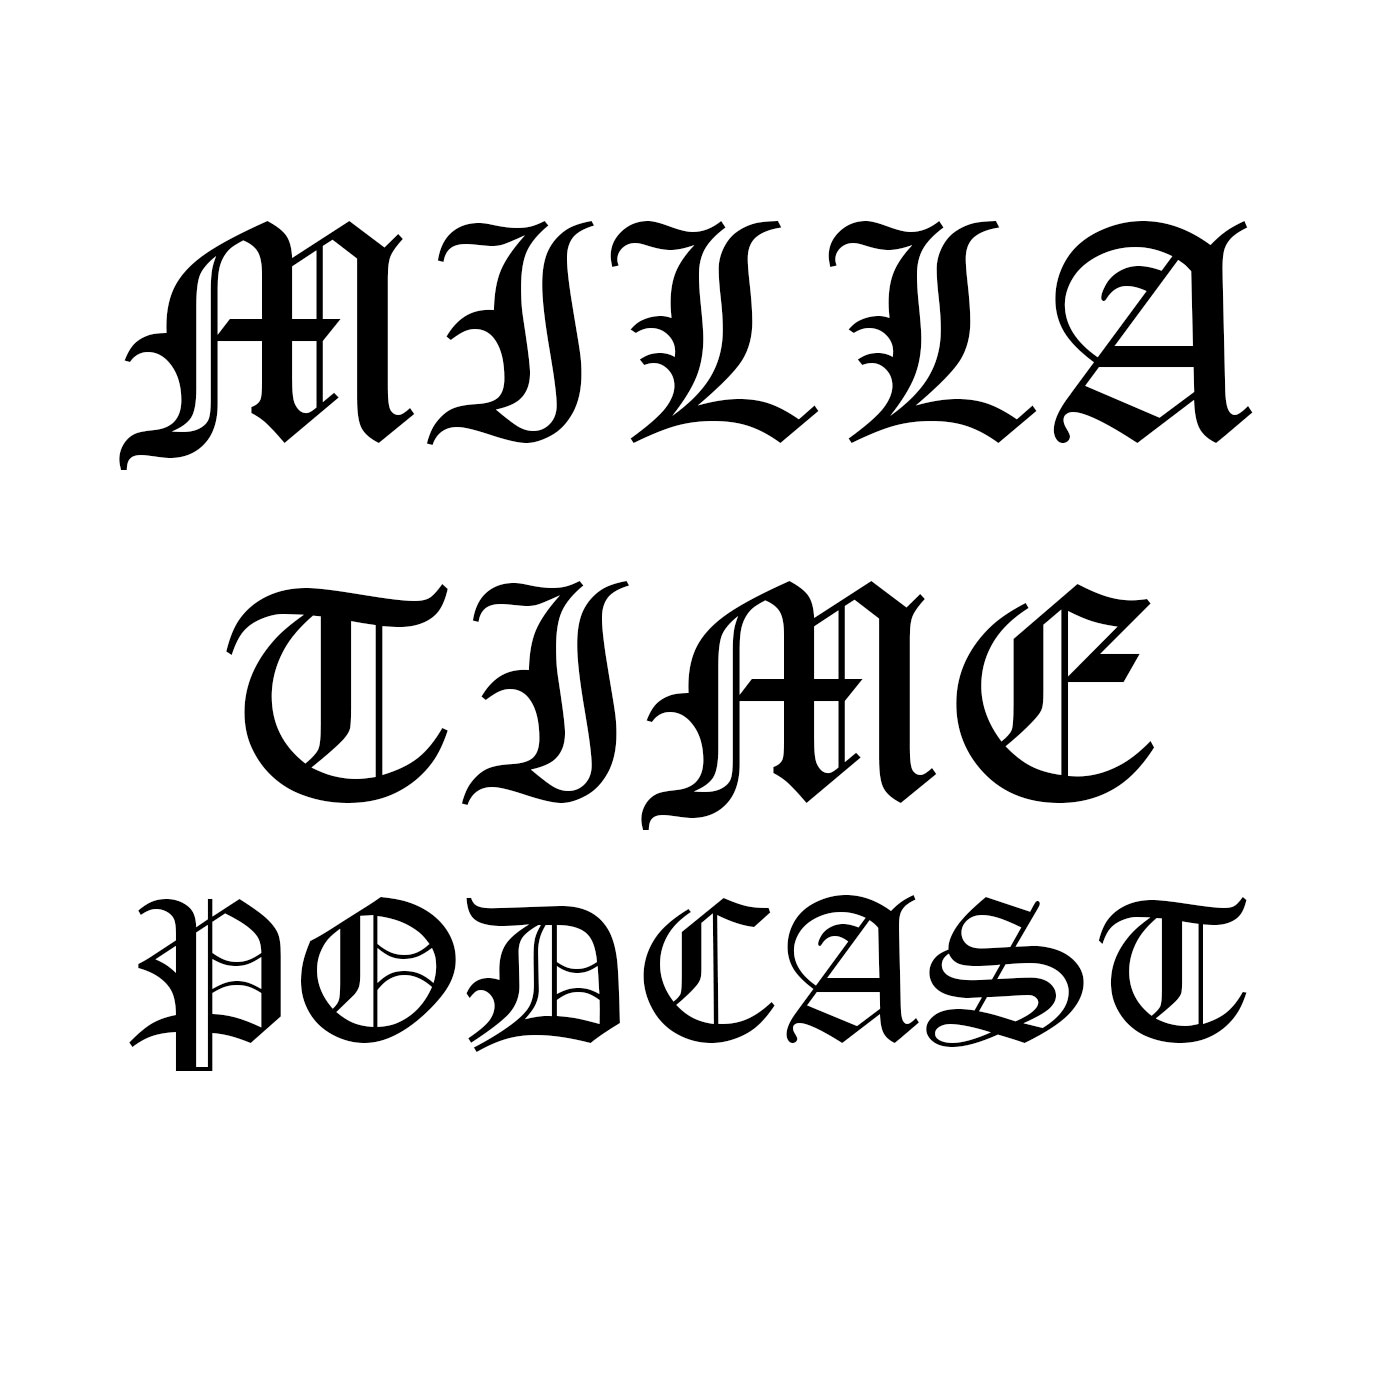 miller time ep 39